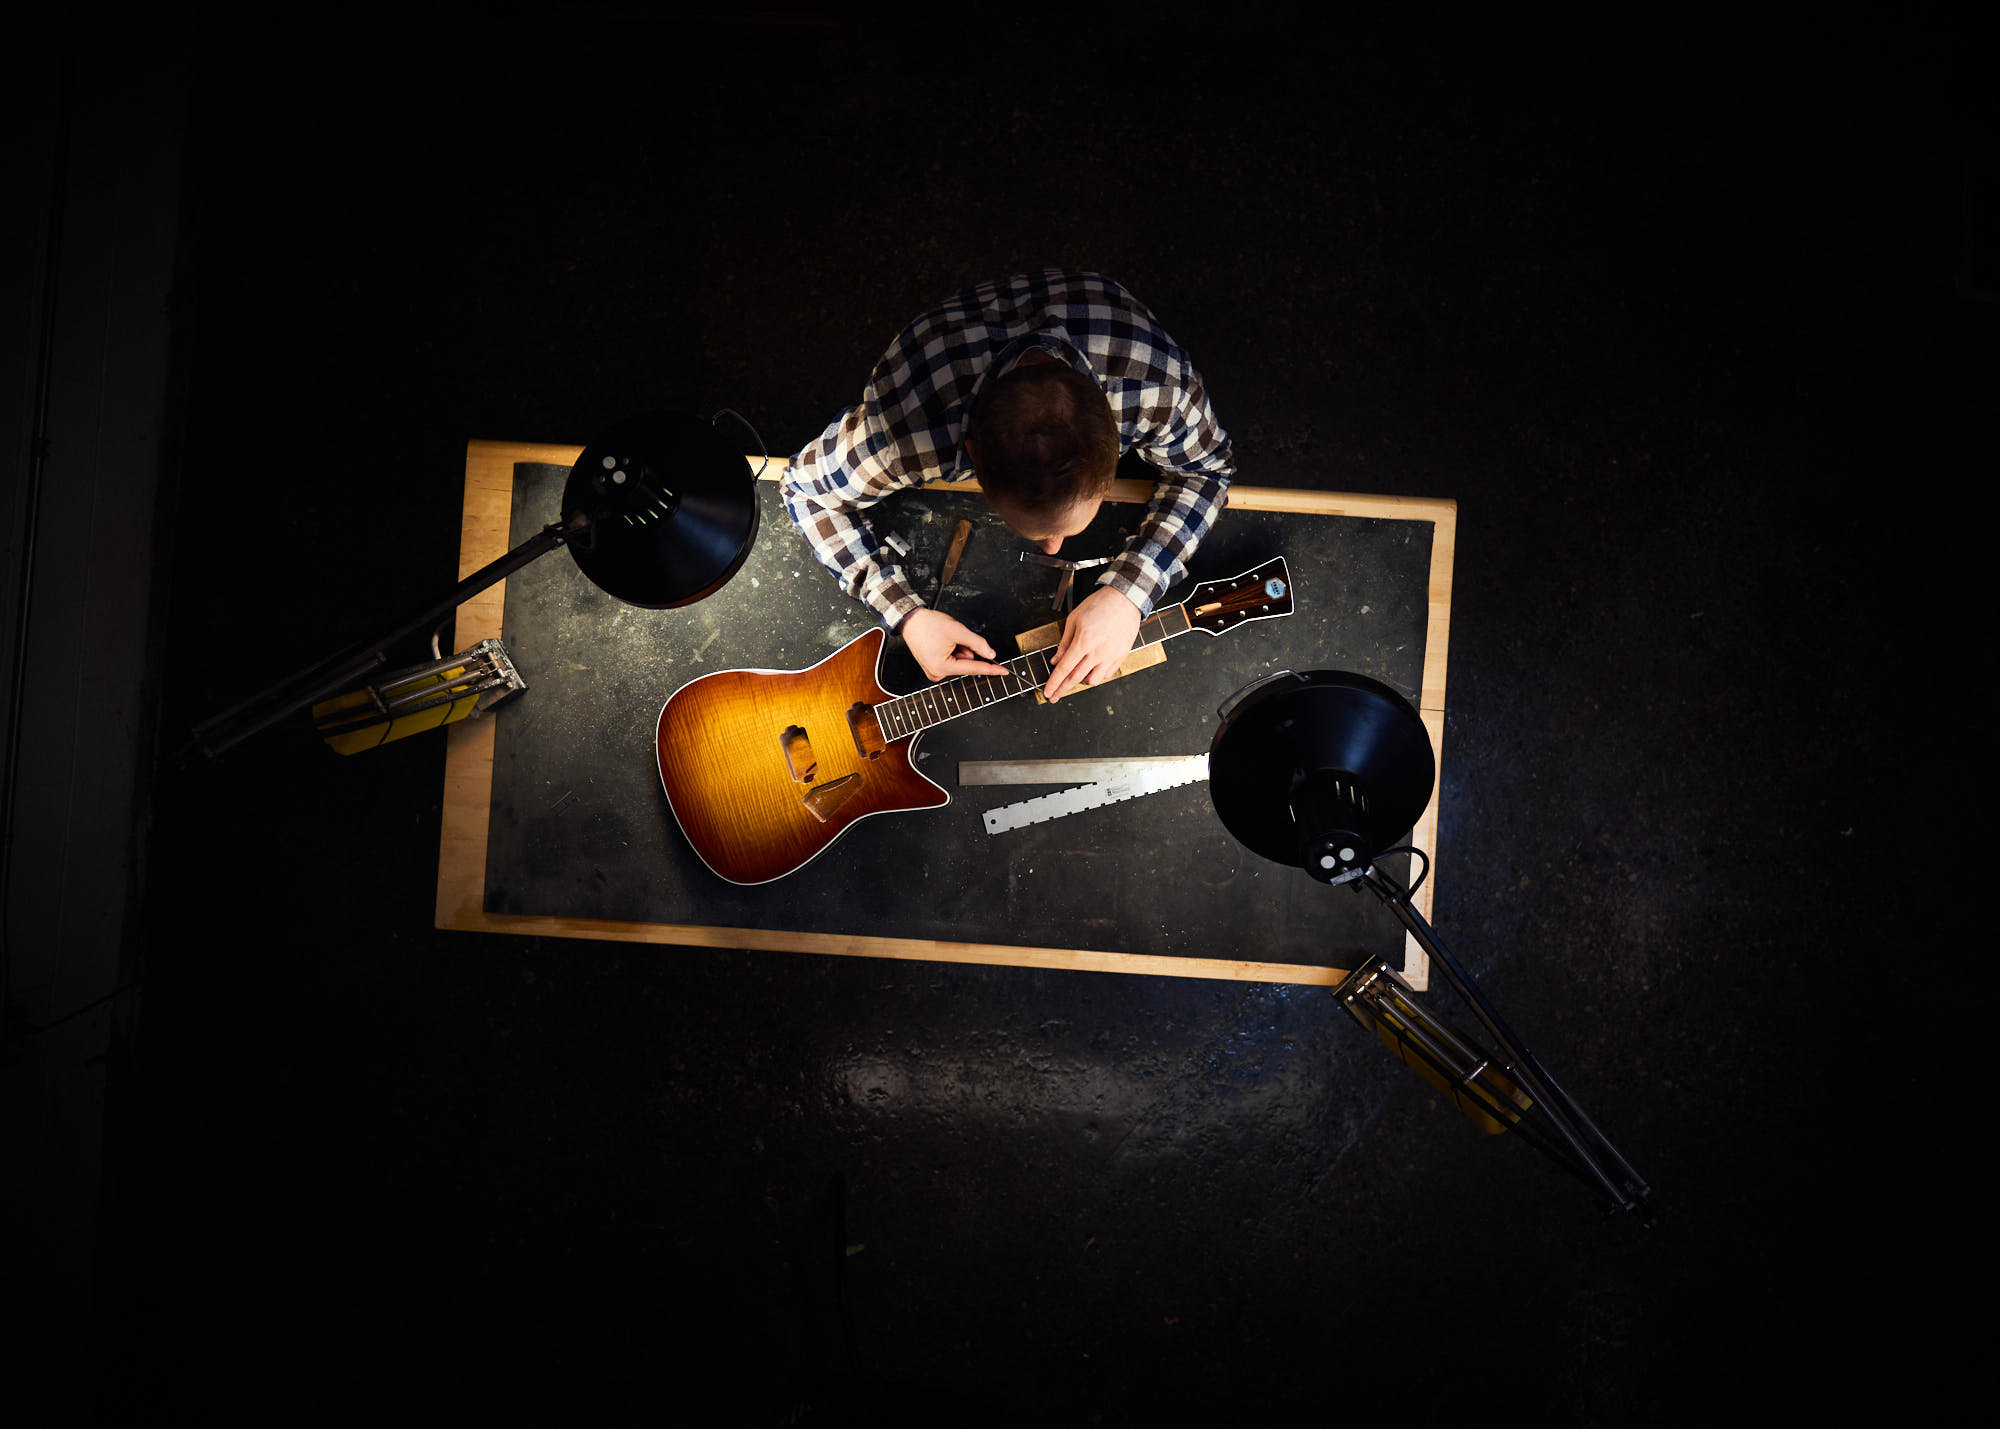 Overhead photograph of Toronto small business guitar owner assembling instrument